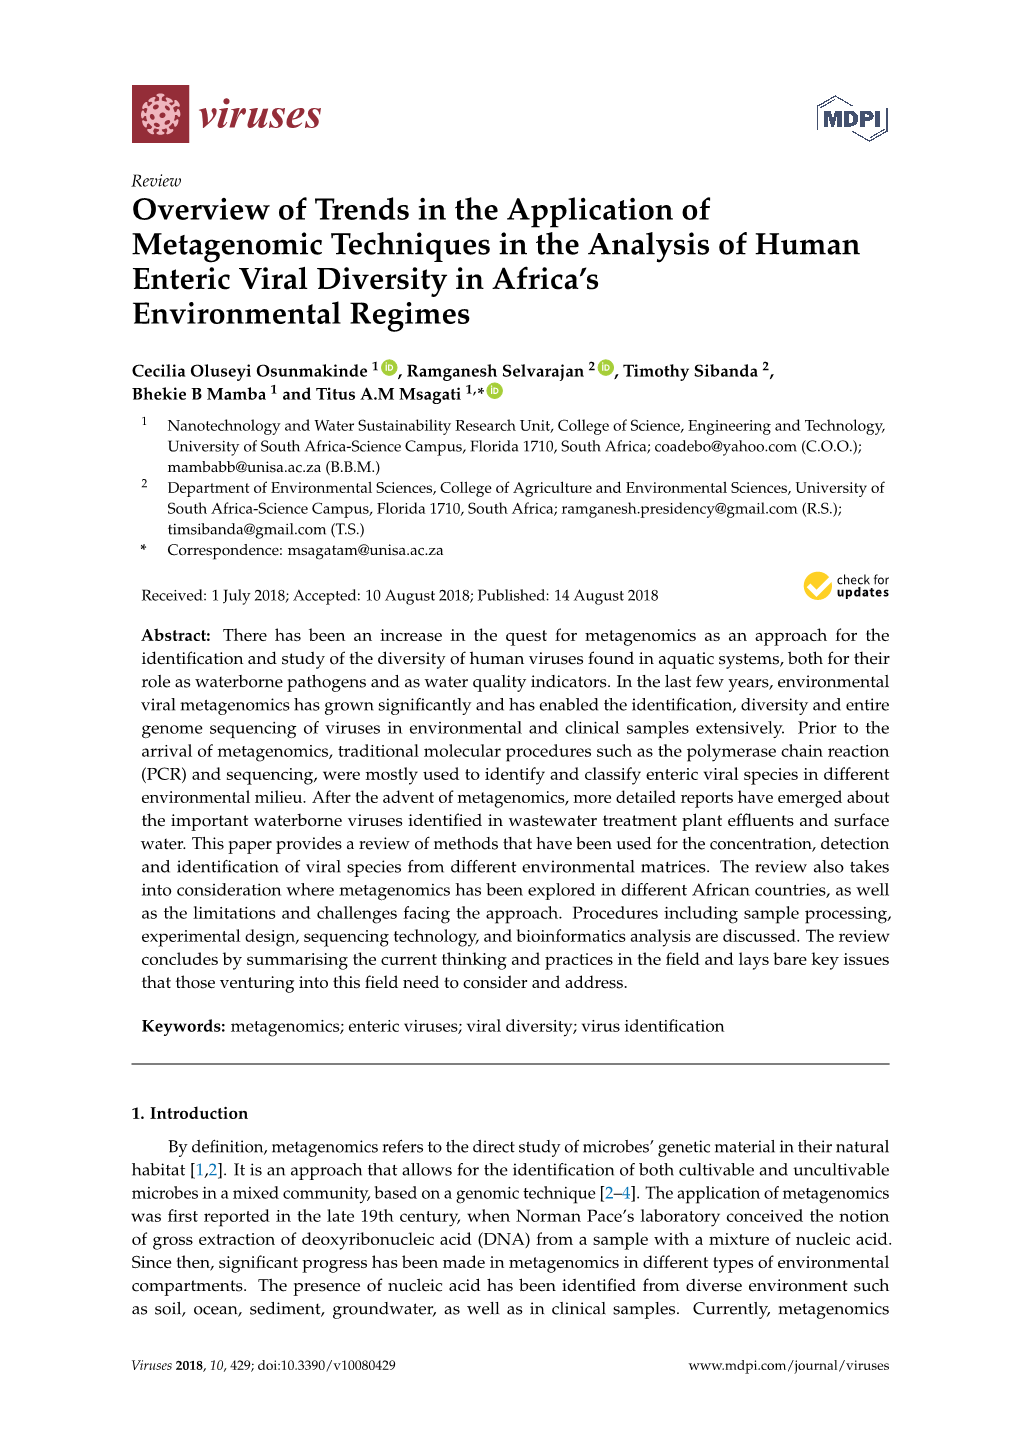 Overview of Trends in the Application of Metagenomic Techniques in the Analysis of Human Enteric Viral Diversity in Africa’S Environmental Regimes